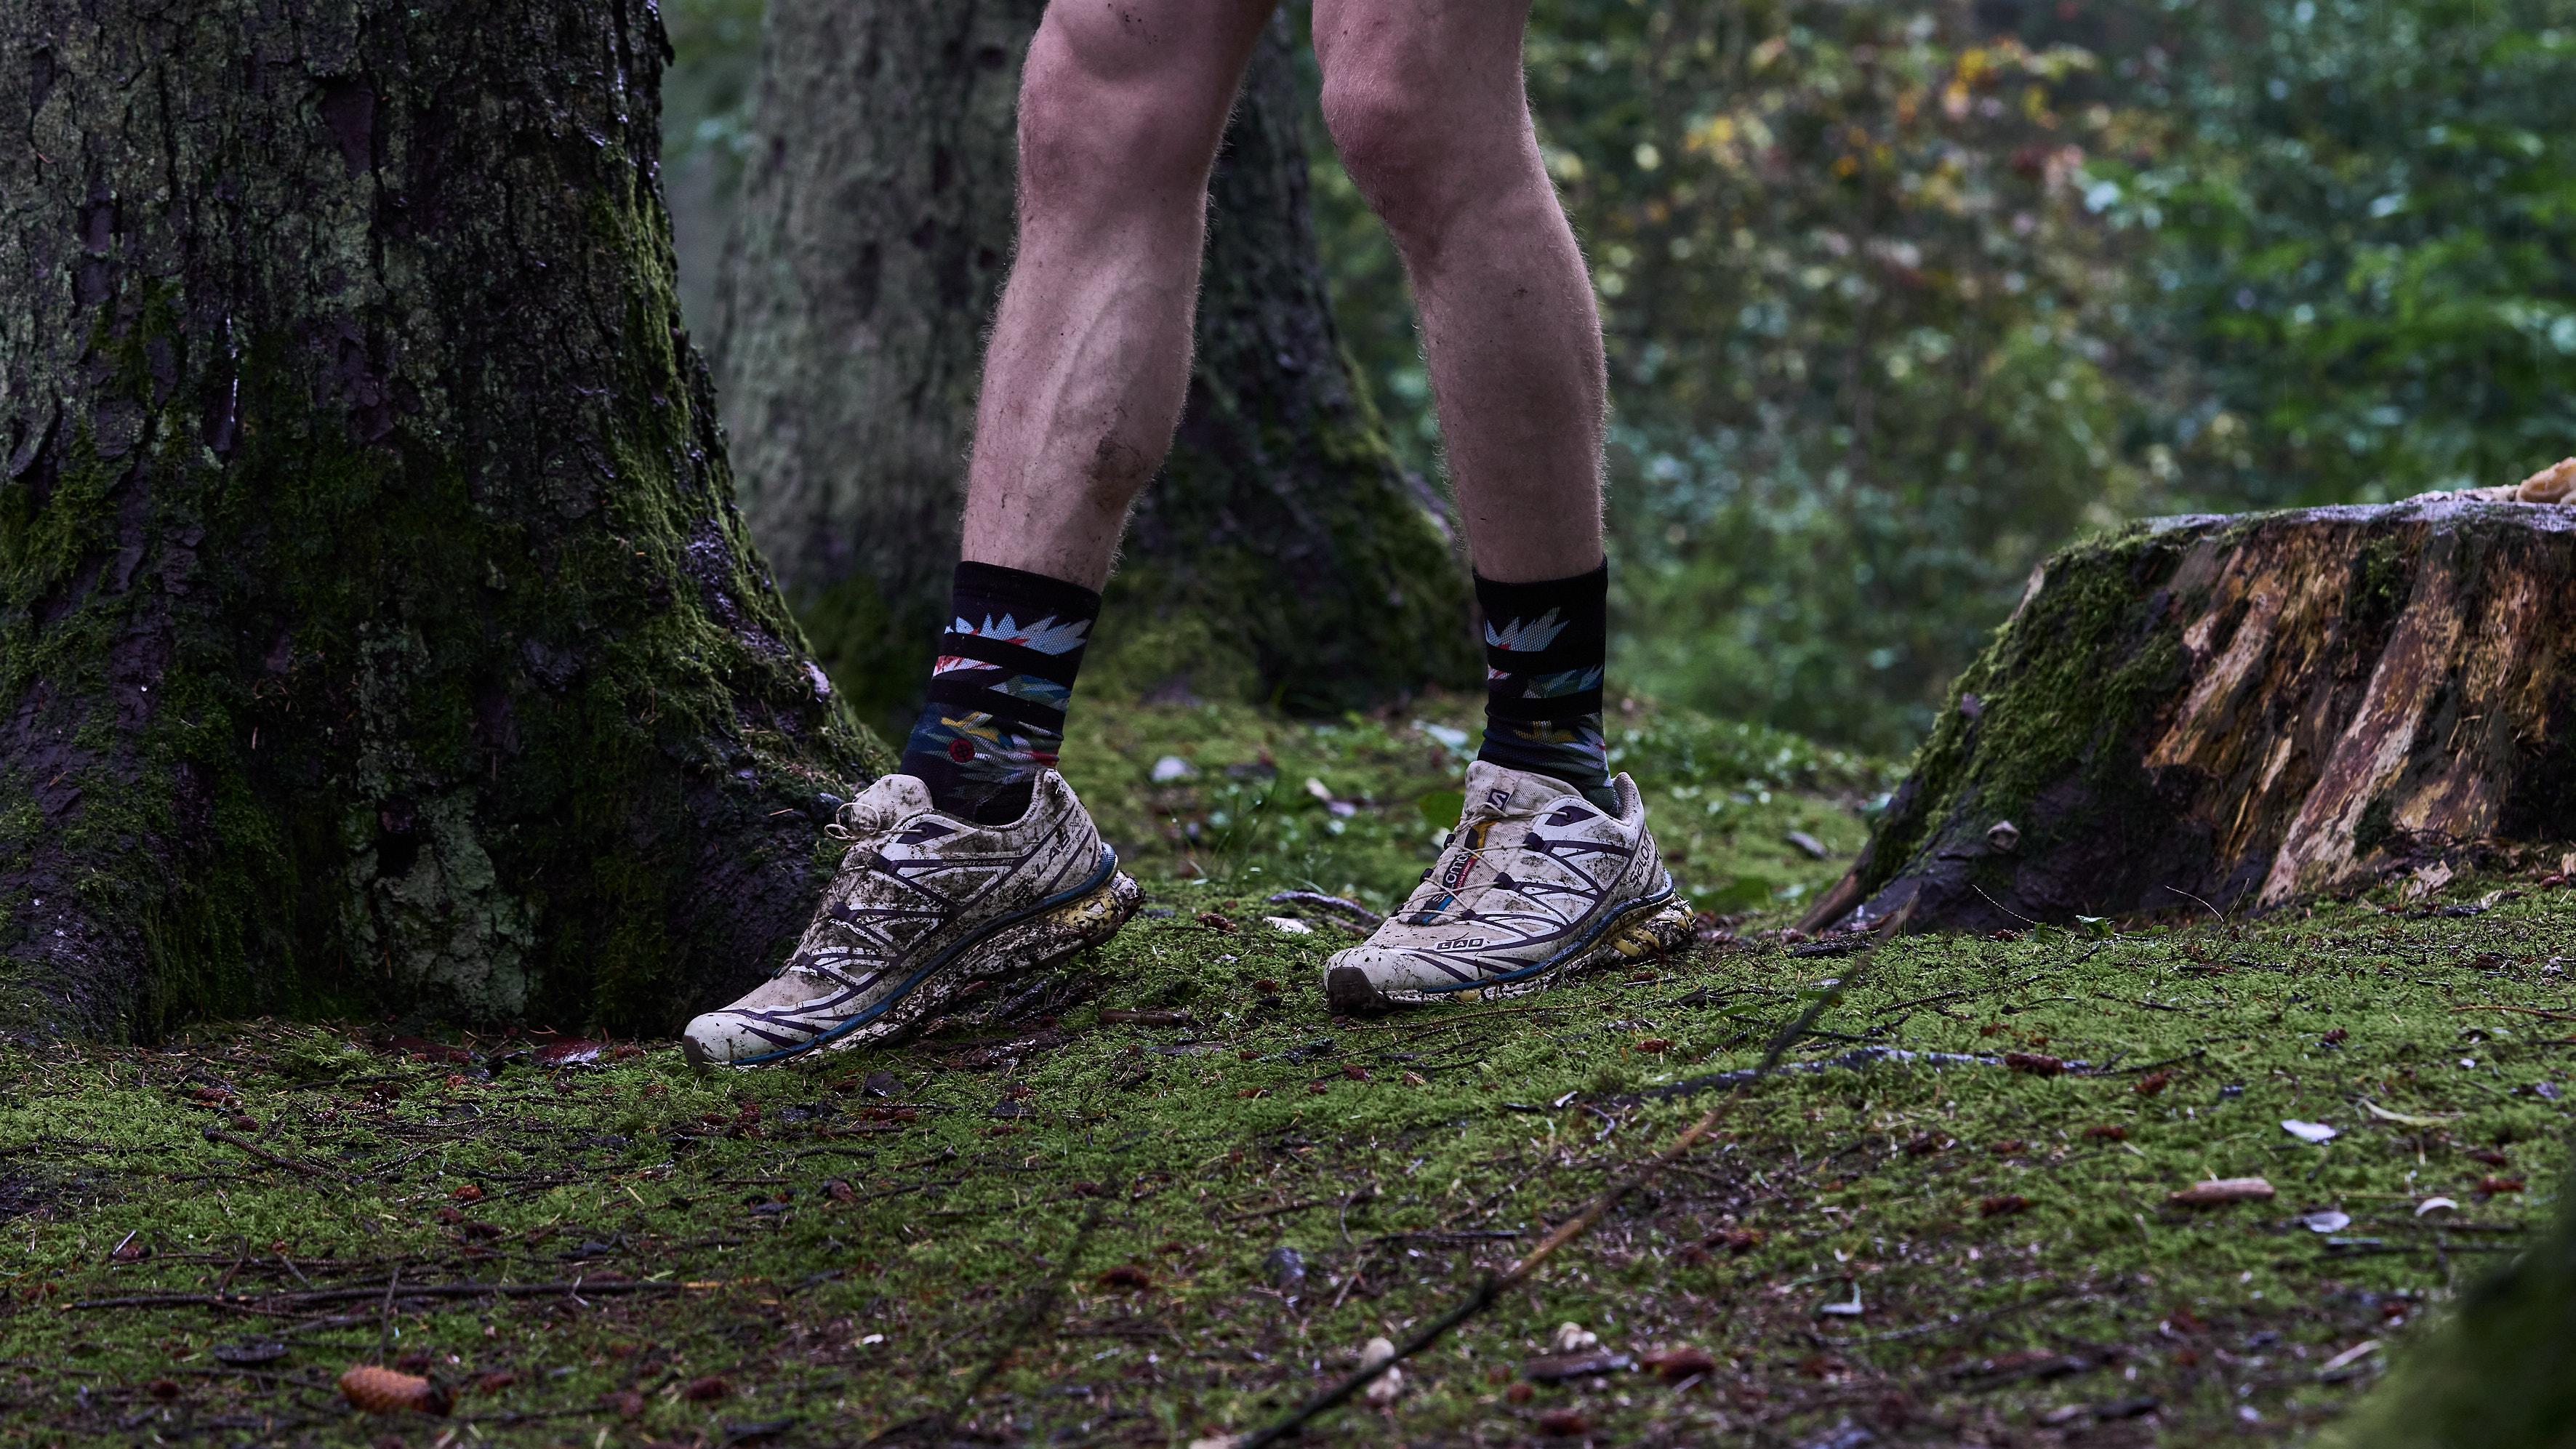 Taking to the trails in the Salomon Speedcross 4 shoes and OMM